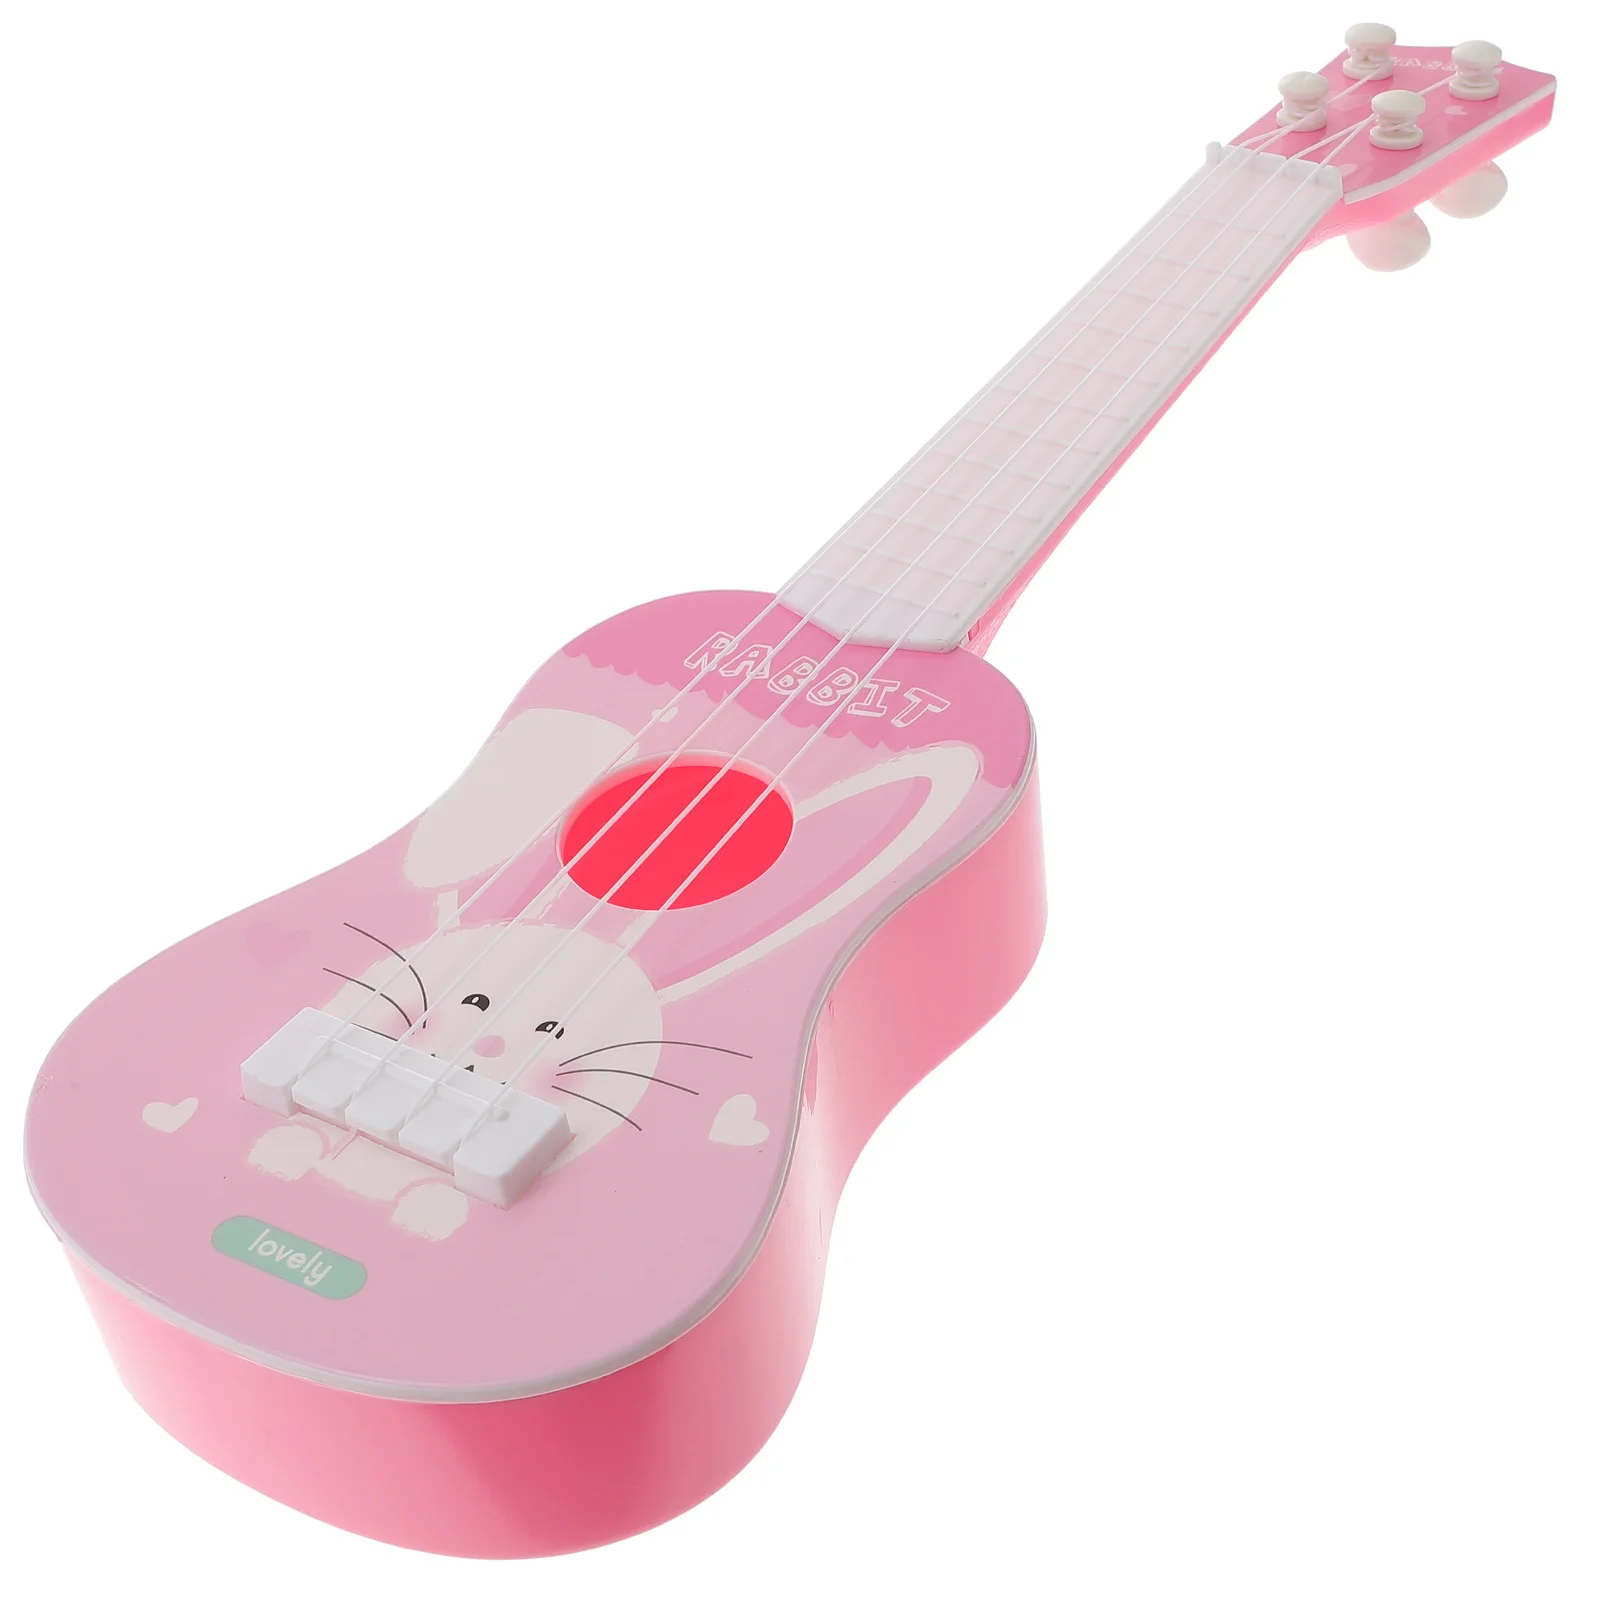 

Simulated Guitar Toy Vintage Style Acoustic Kidcraft Playset Toddlers Toys Musical Instrument